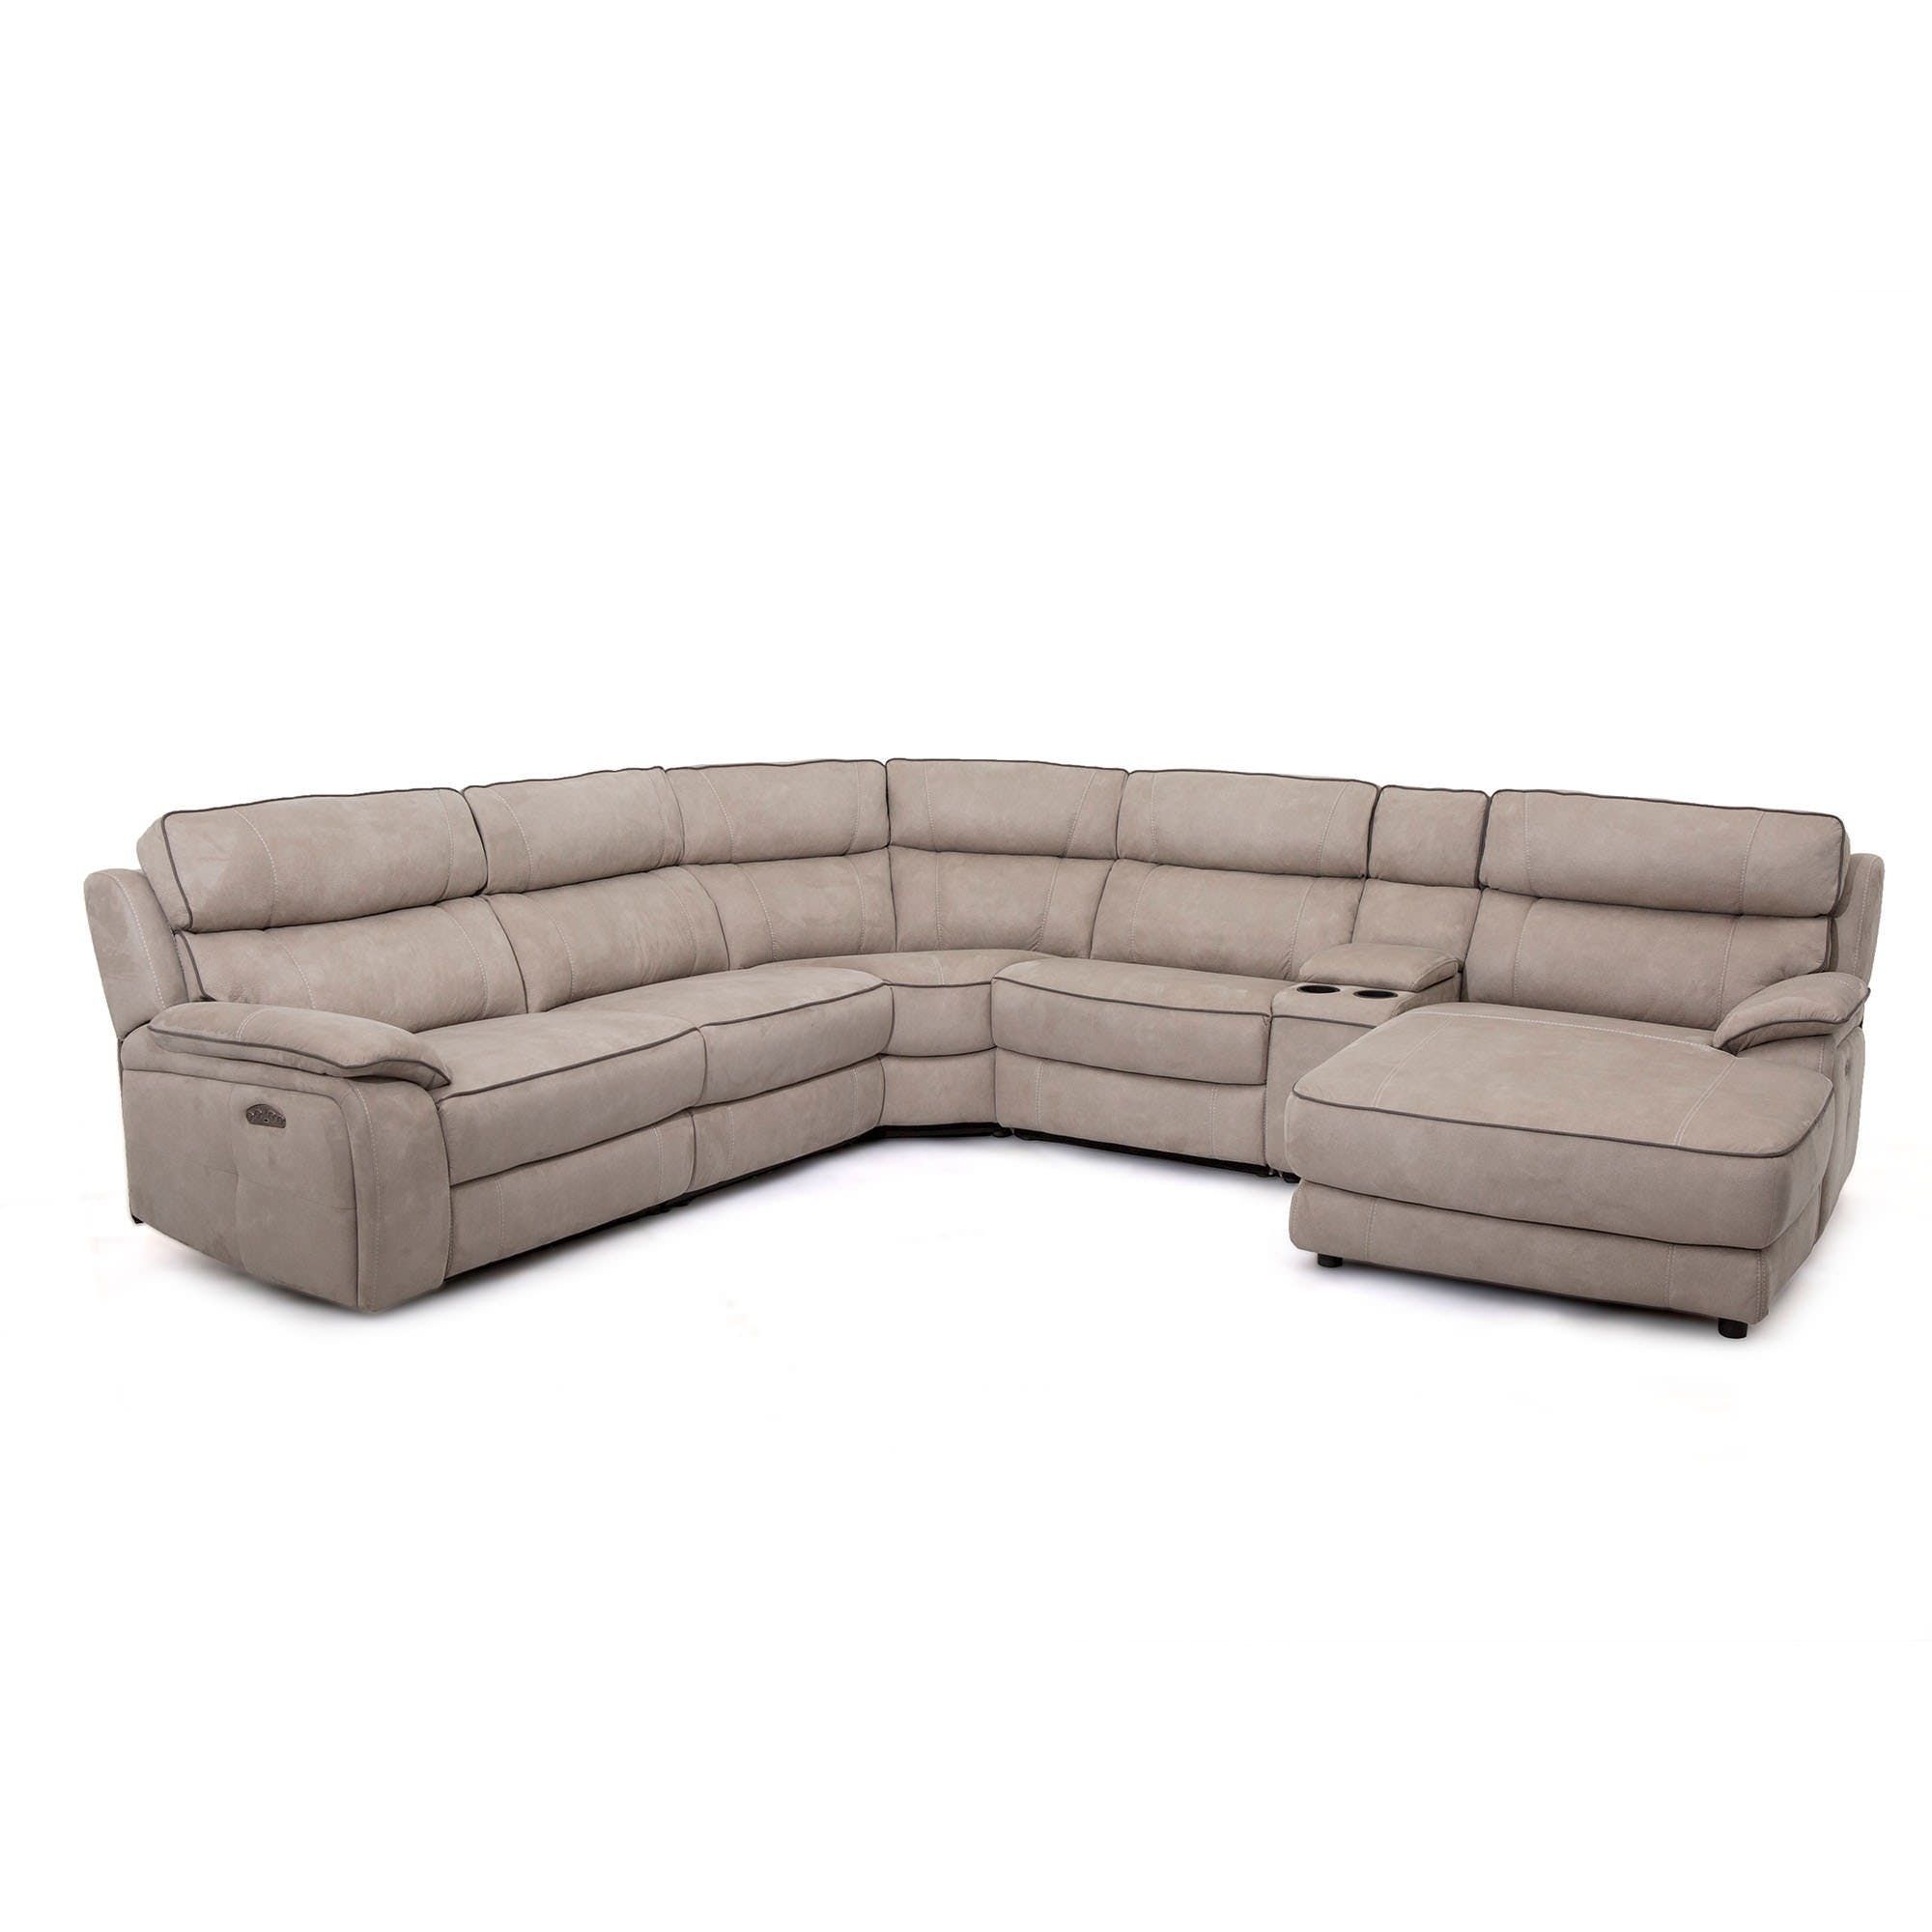 Silver Grey 6 Piece Power Reclining Sectional With Power Headrest Throughout Kristen Silver Grey 6 Piece Power Reclining Sectionals (View 4 of 30)